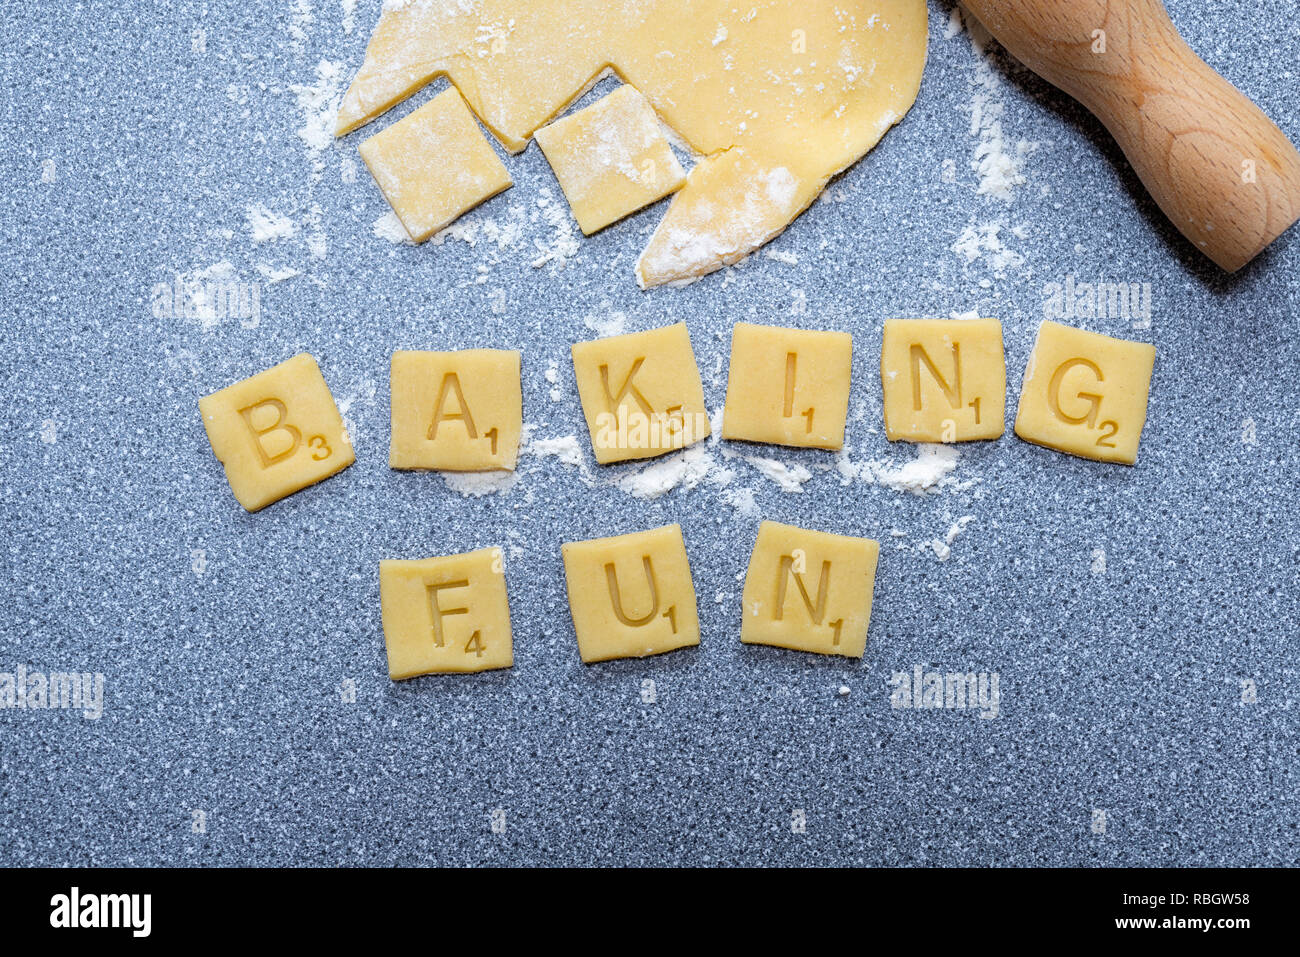 Baking fun - scrabble words made from biscuit / cookie dough. Stock Photo